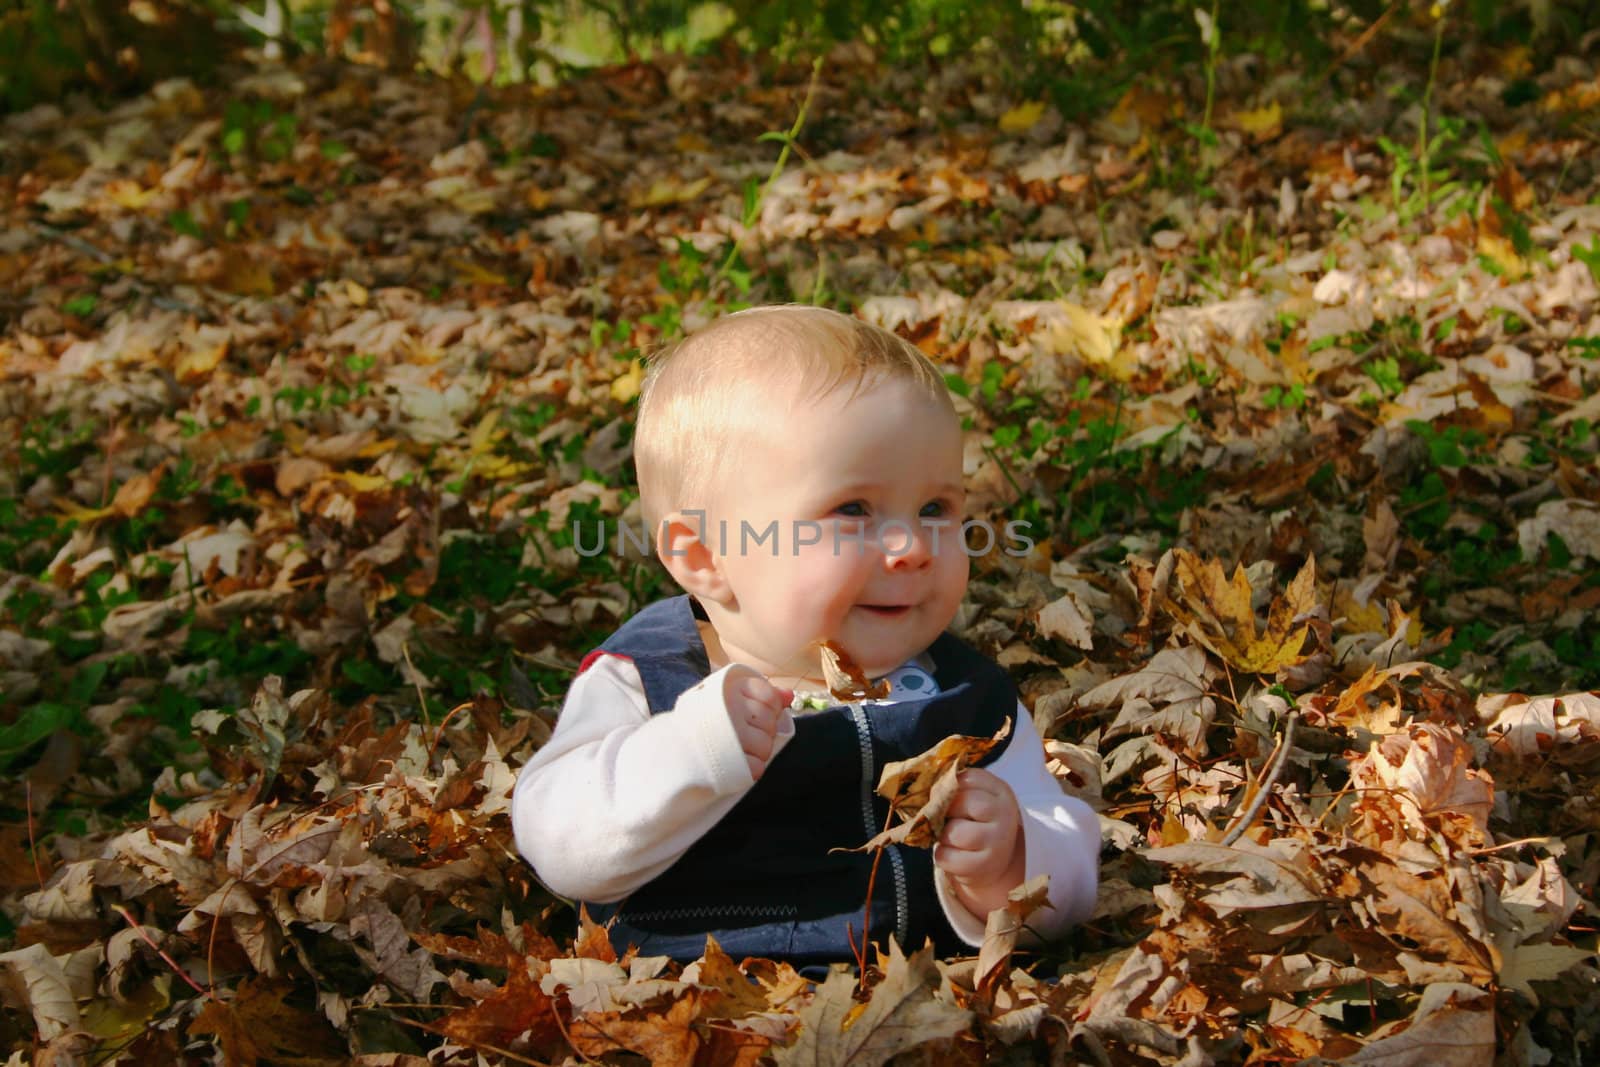 Little baby girl siting in fallen leaves and laughing